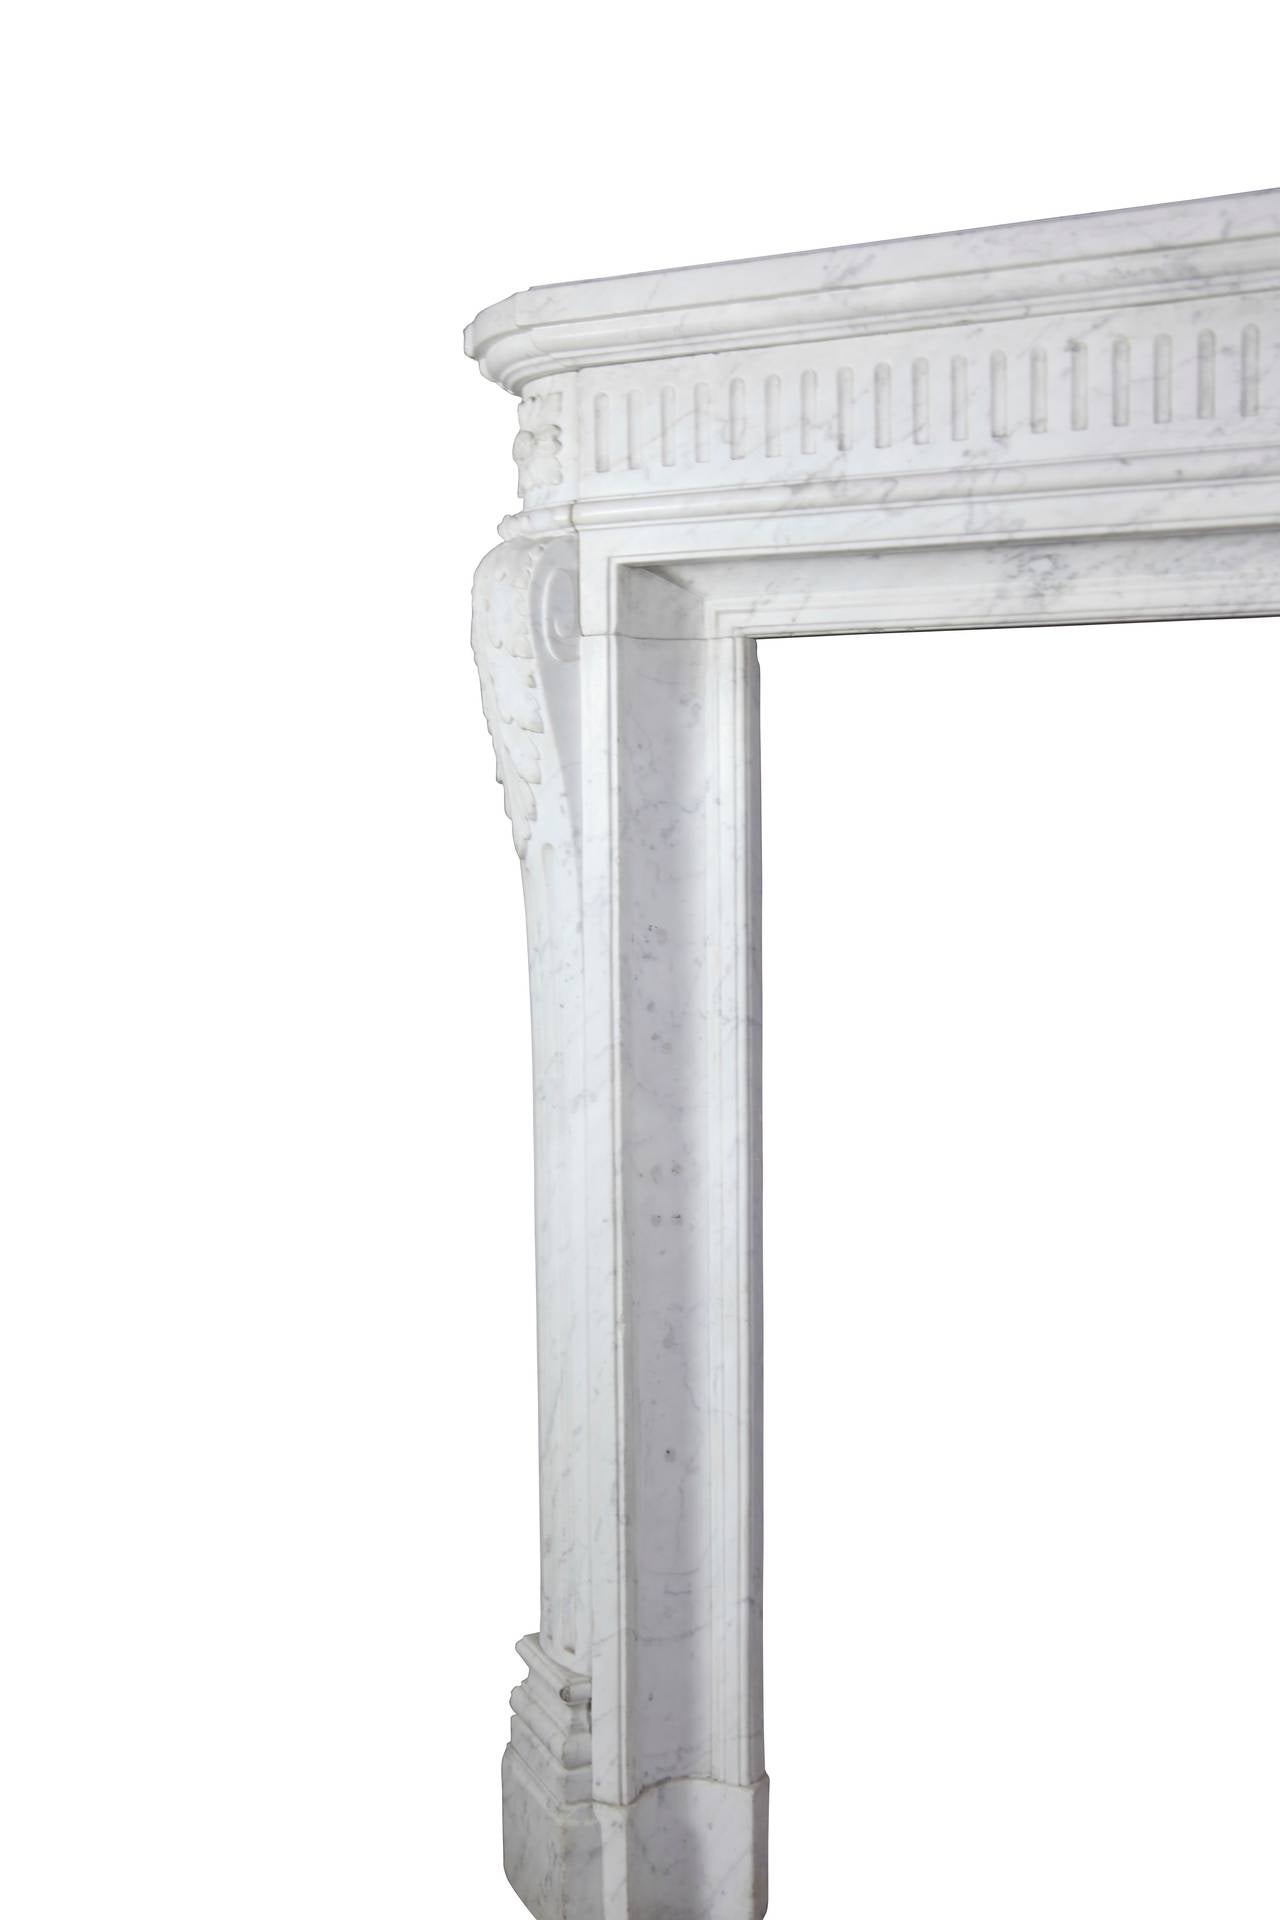 This original Louis XVI period fireplace surround in Carrara marble is in a great condition. Its small size is unusual; it is a real petit bijoux for a small room or apartment.
Measures:
122 cm EW 48.03”
107 cm EH 42.13”
85 cm IW 33.46”
86 cm